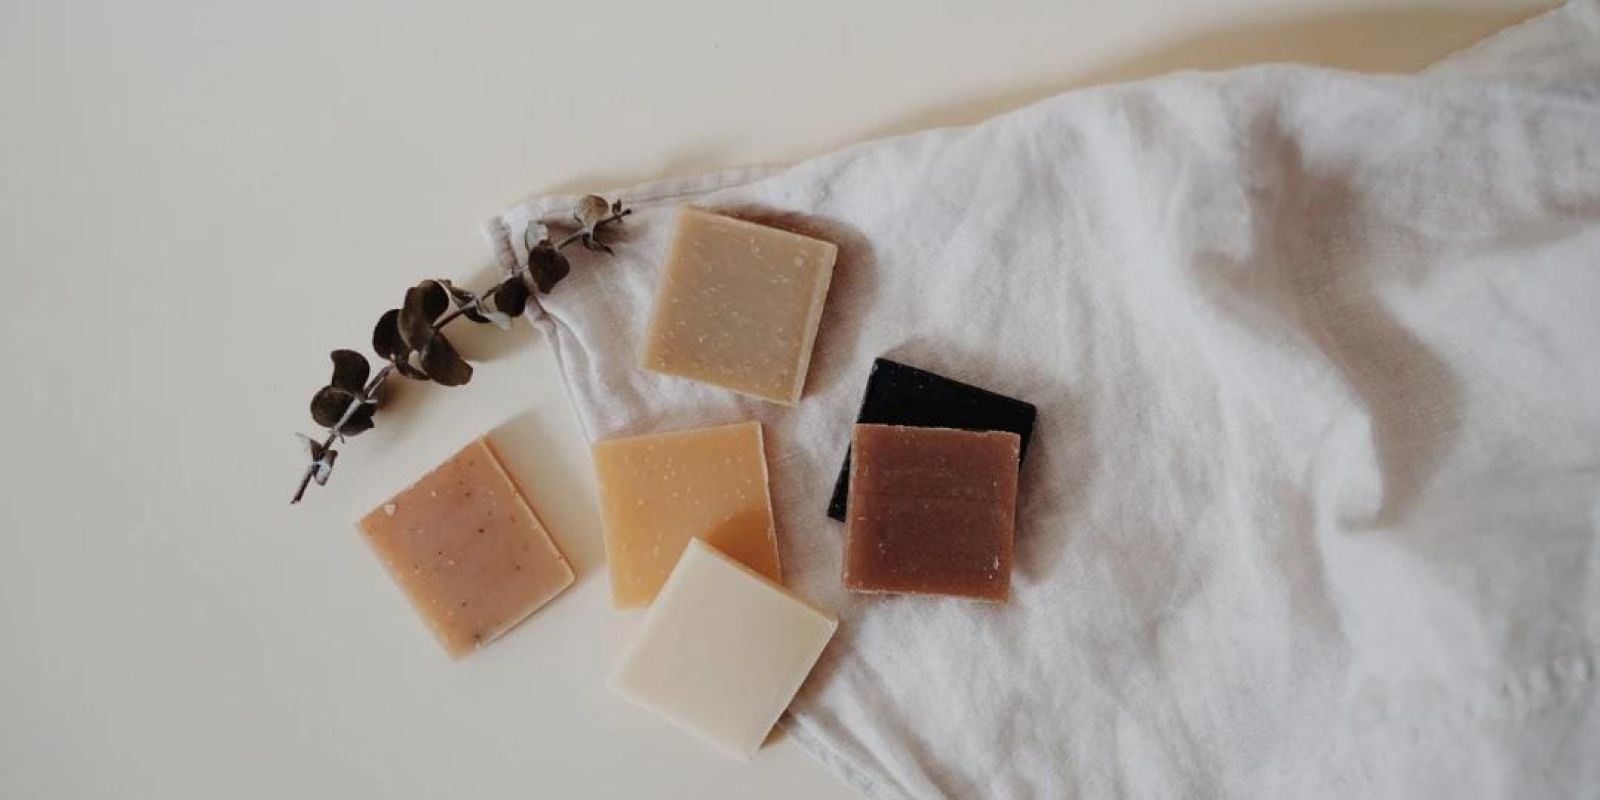 5 Shampoo Bars That You MUST TRY From PURC Organics! admin ajax.php?action=kernel&p=image&src=%7B%22file%22%3A%22wp content%2Fuploads%2F2023%2F05%2FWhatsApp Image 2023 05 12 at 13.12.34